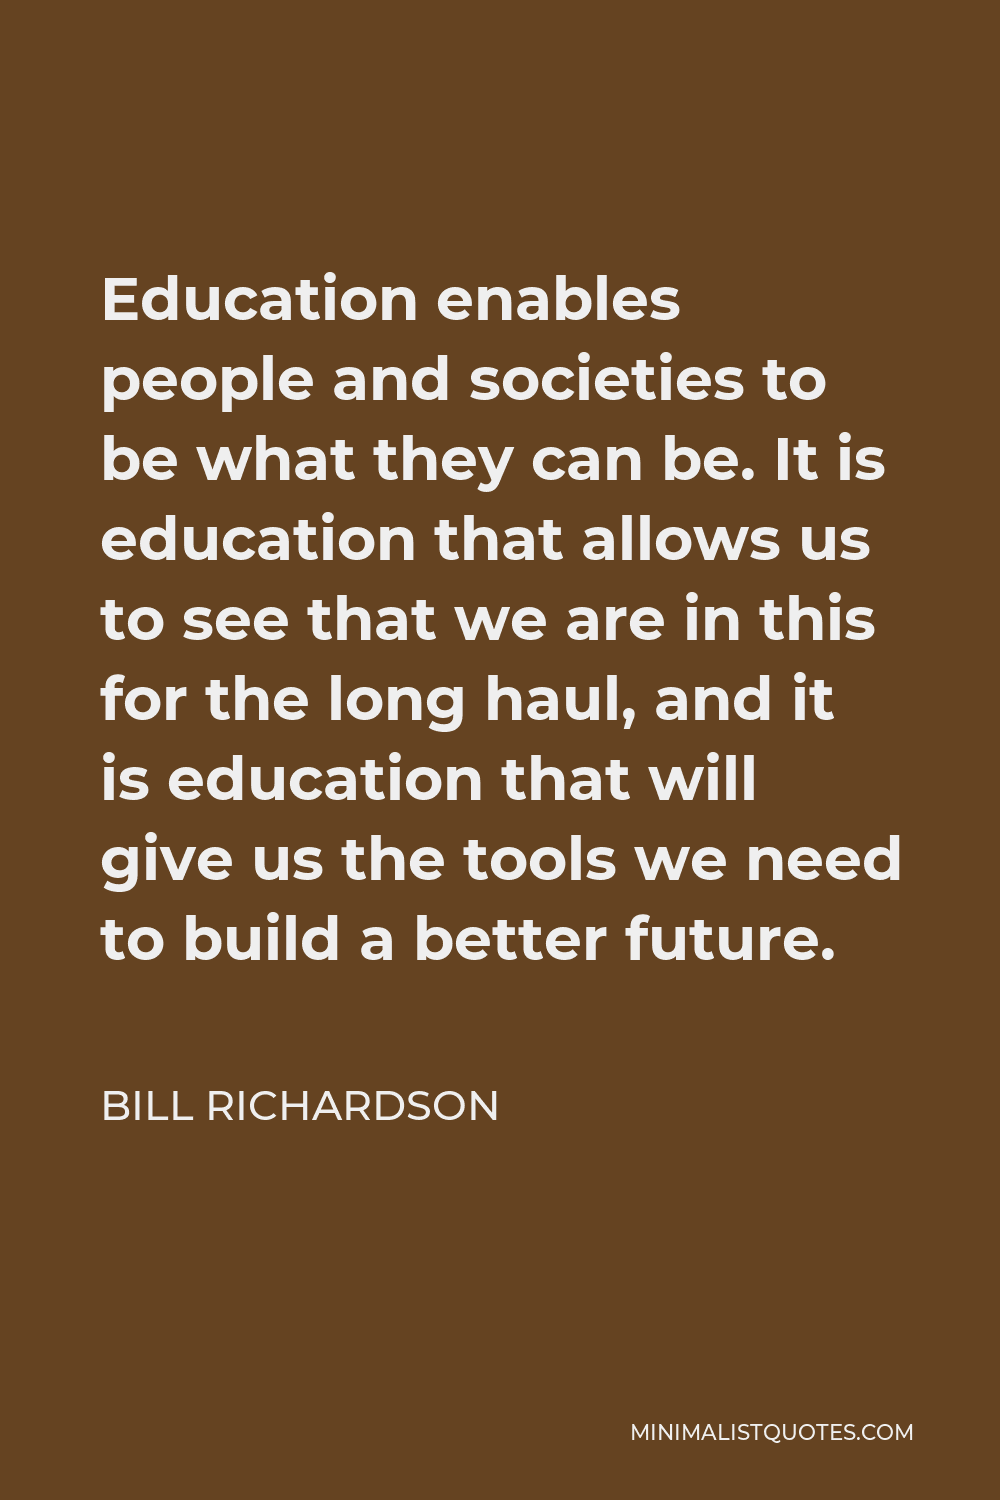 Bill Richardson Quote - Education enables people and societies to be what they can be. It is education that allows us to see that we are in this for the long haul, and it is education that will give us the tools we need to build a better future.